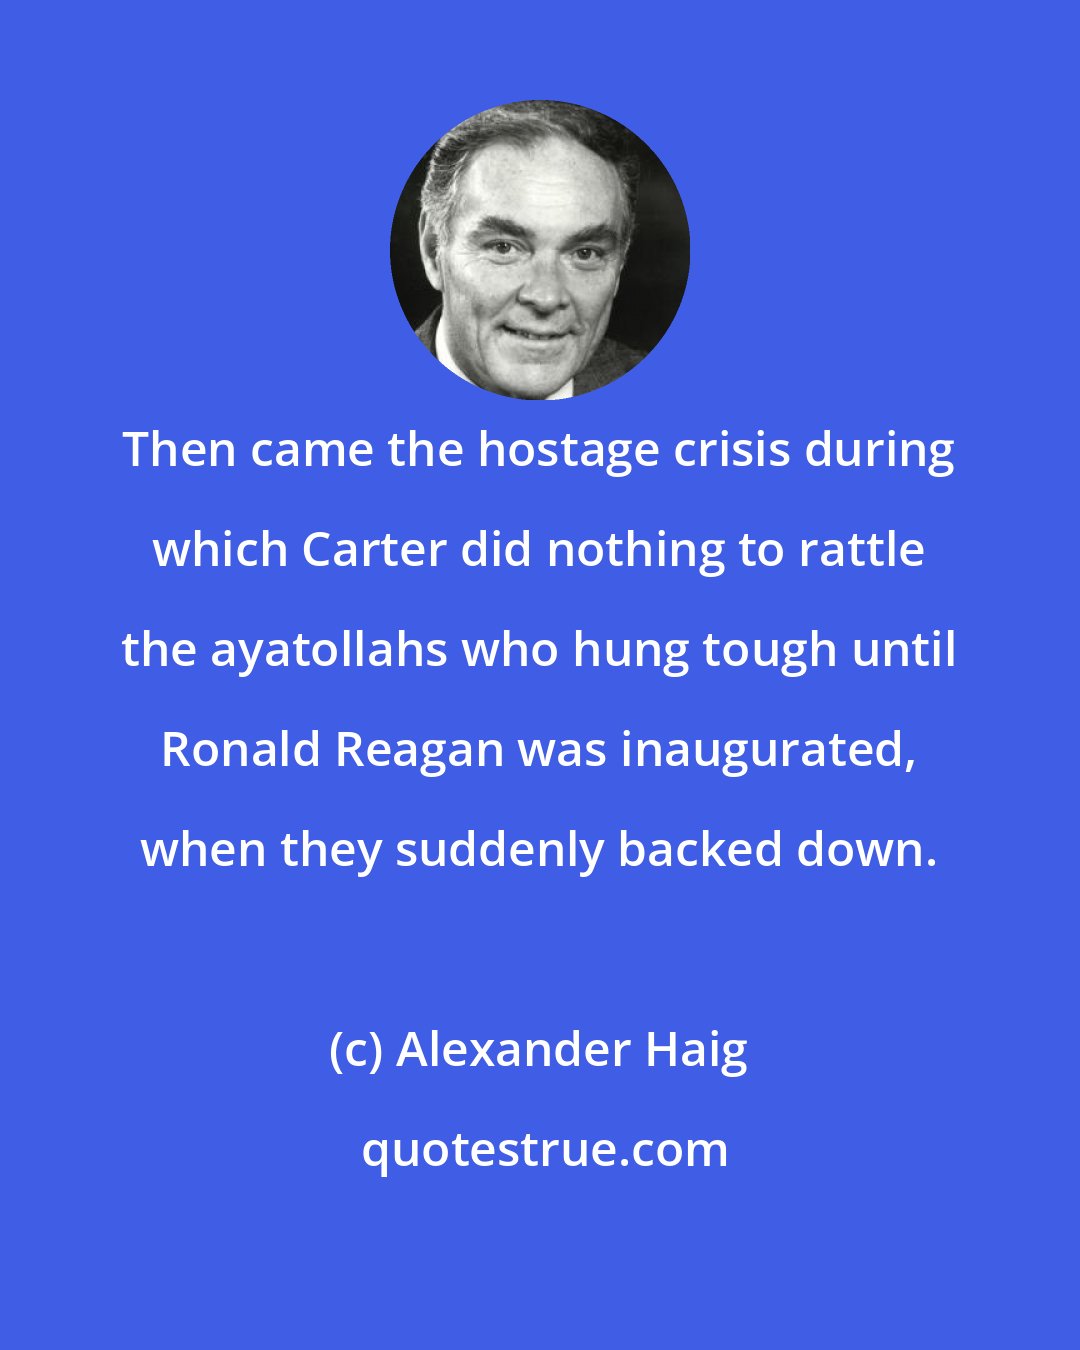 Alexander Haig: Then came the hostage crisis during which Carter did nothing to rattle the ayatollahs who hung tough until Ronald Reagan was inaugurated, when they suddenly backed down.